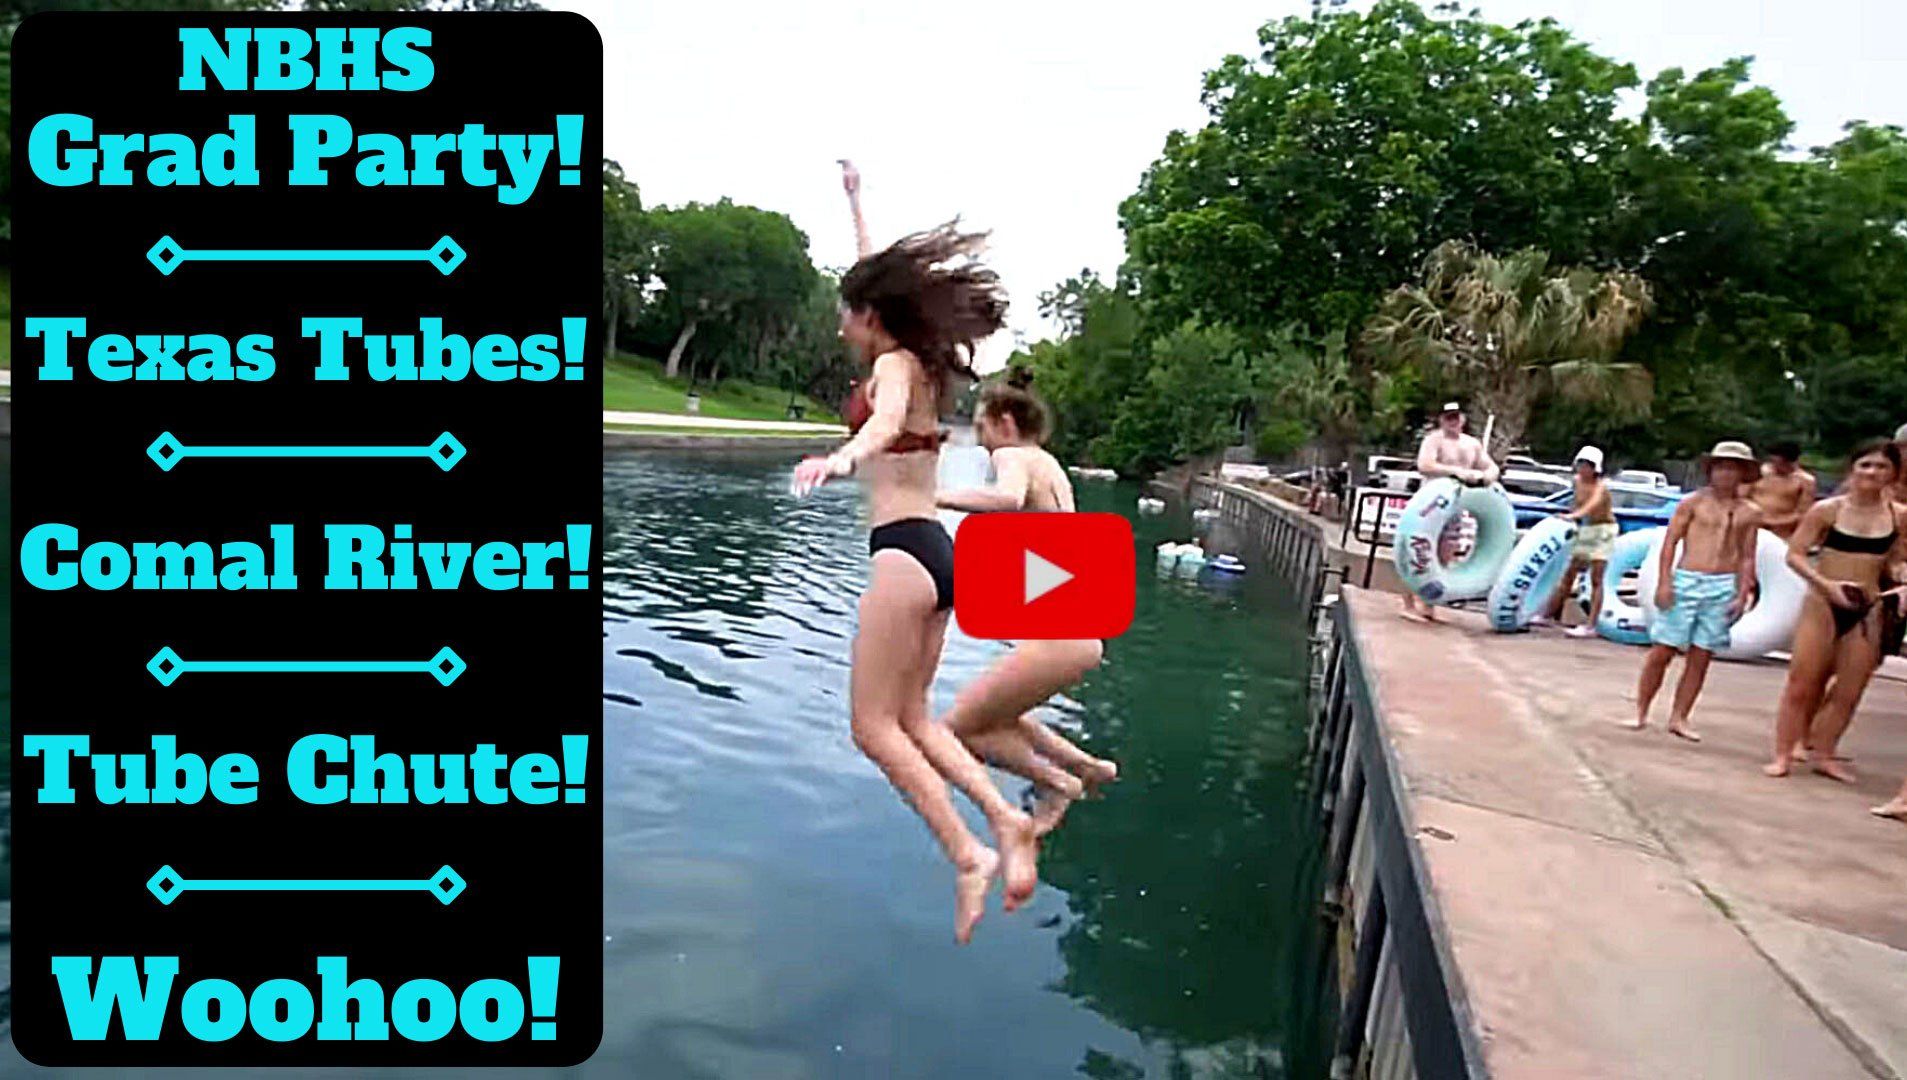 New Braunfels High School Comal River Tubing Party at Texas Tubes featuring the Tube Chute!